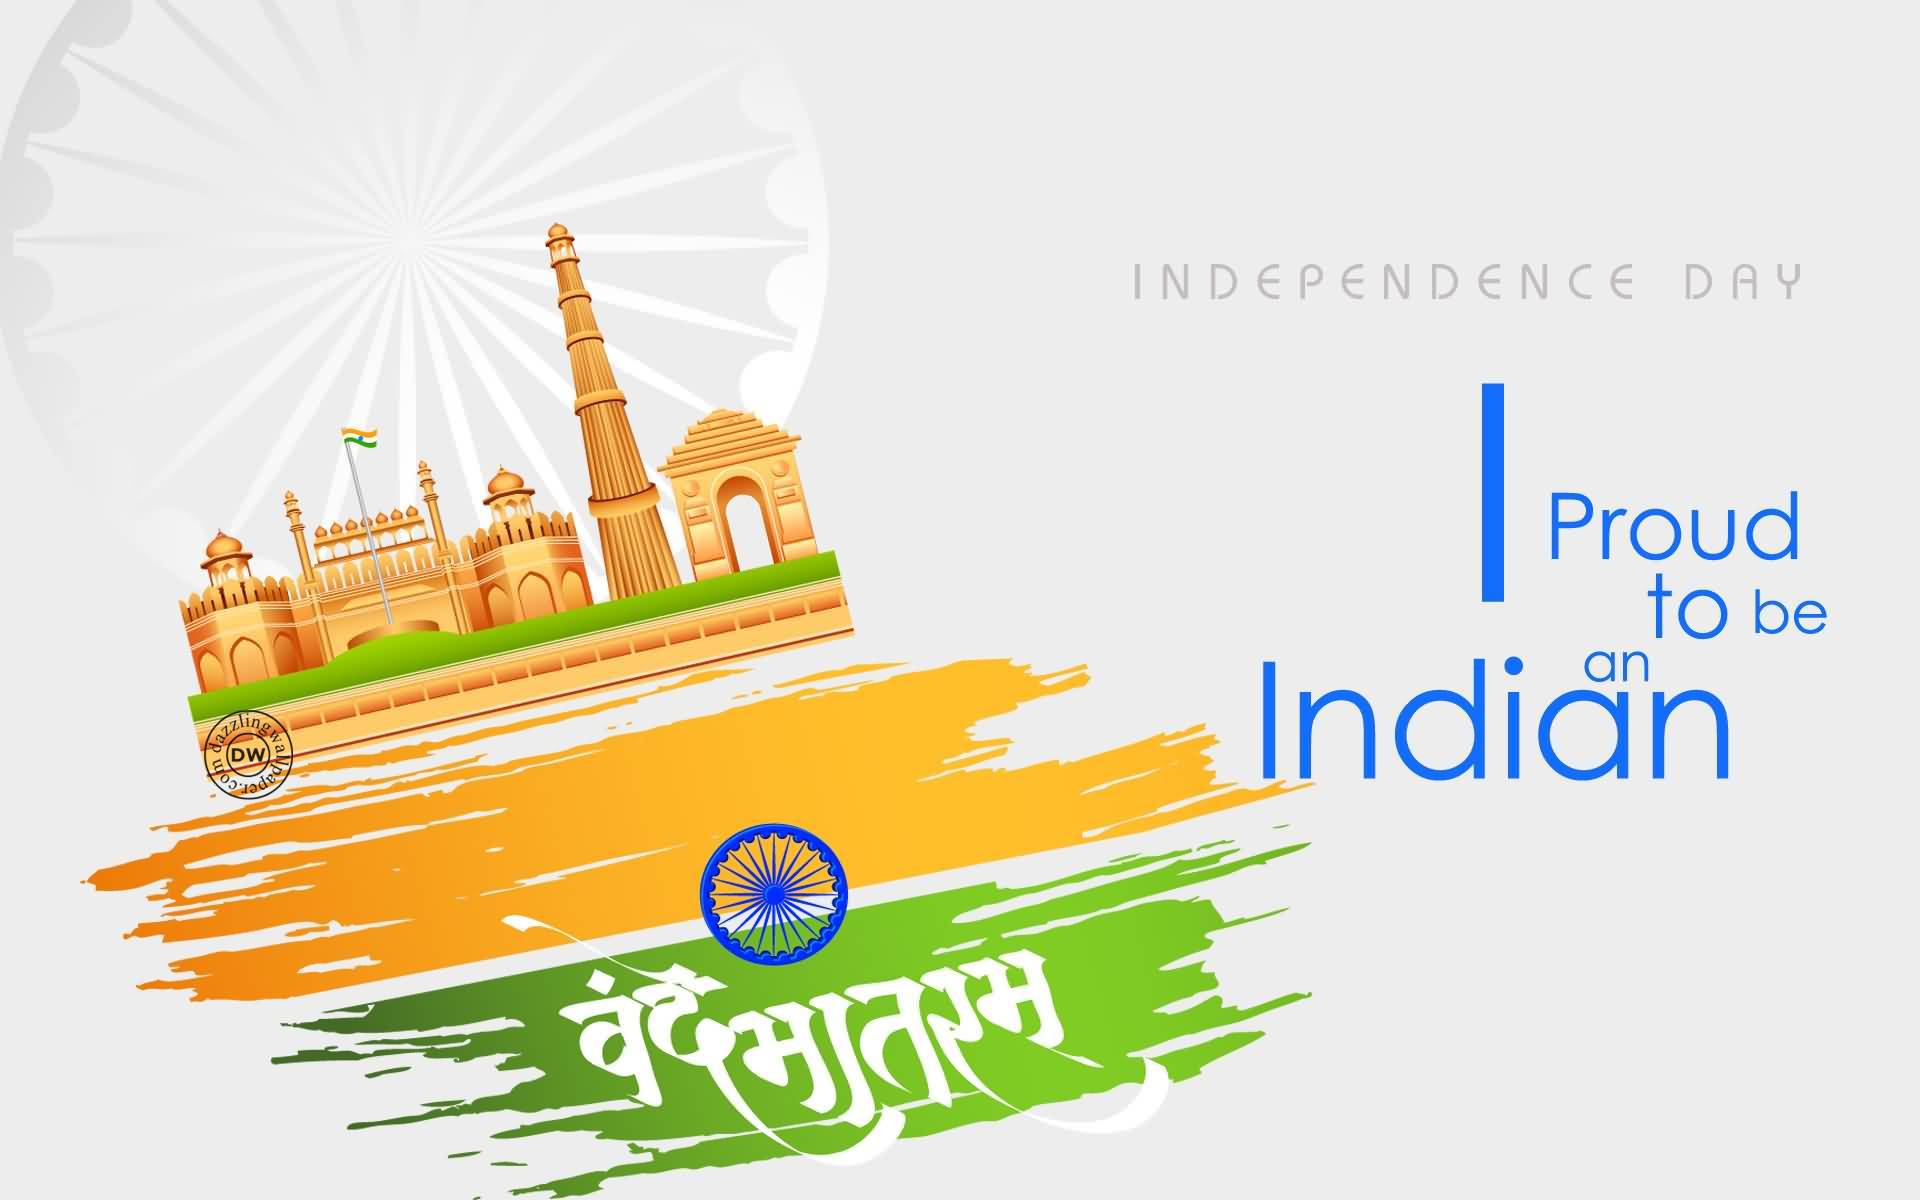 Independence Day I Proud To Be An Indian